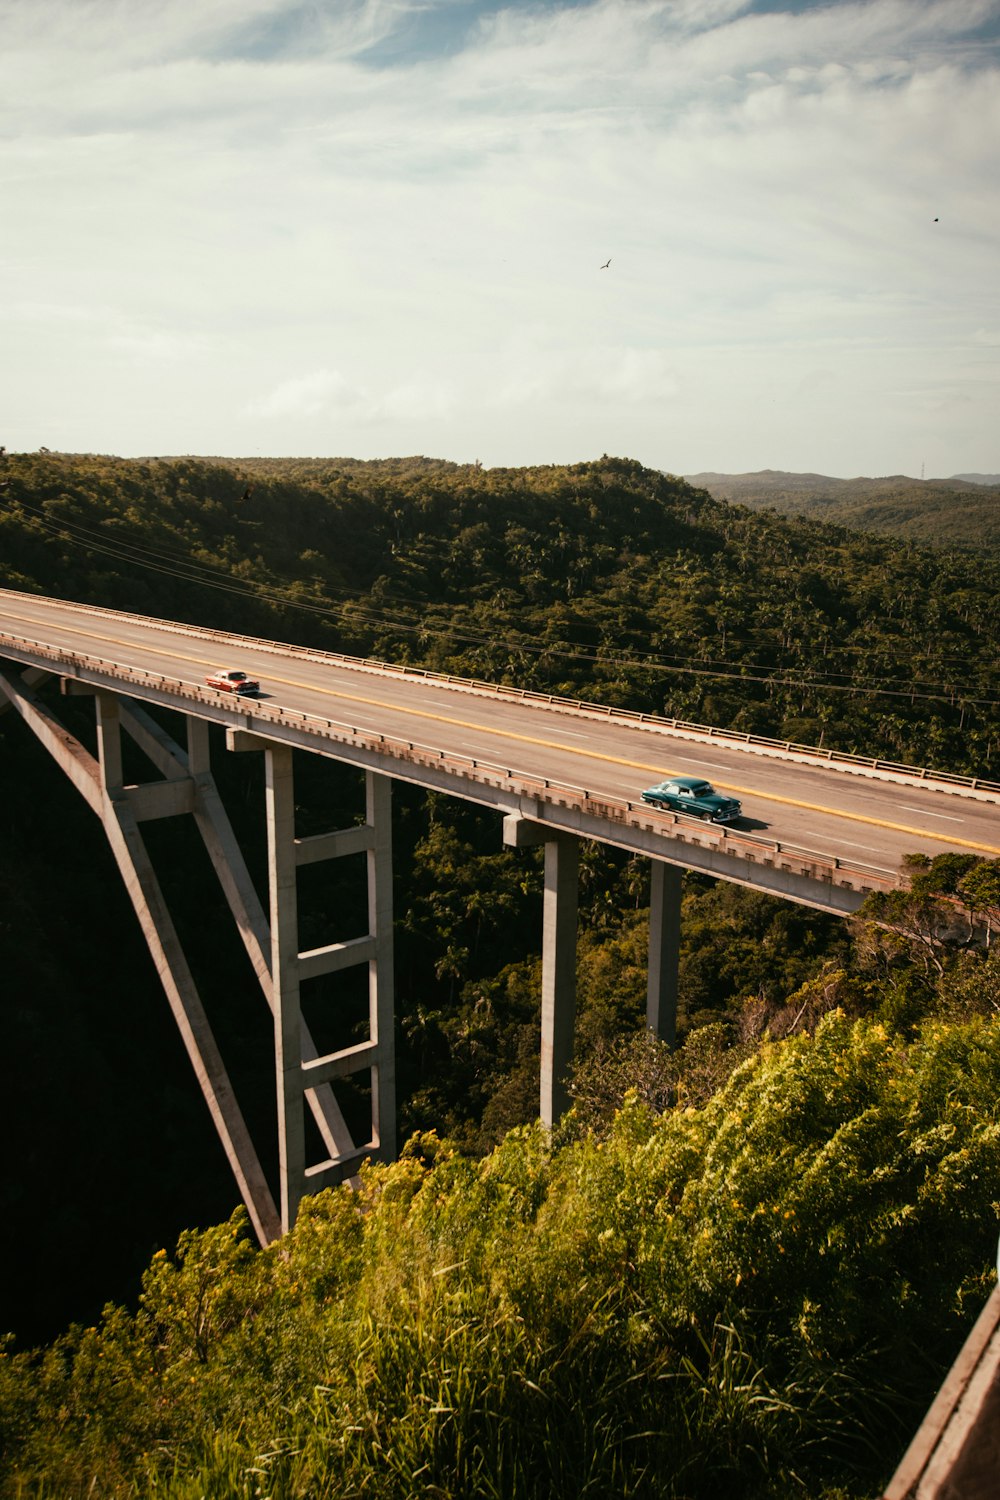 two cars passing by a bridge